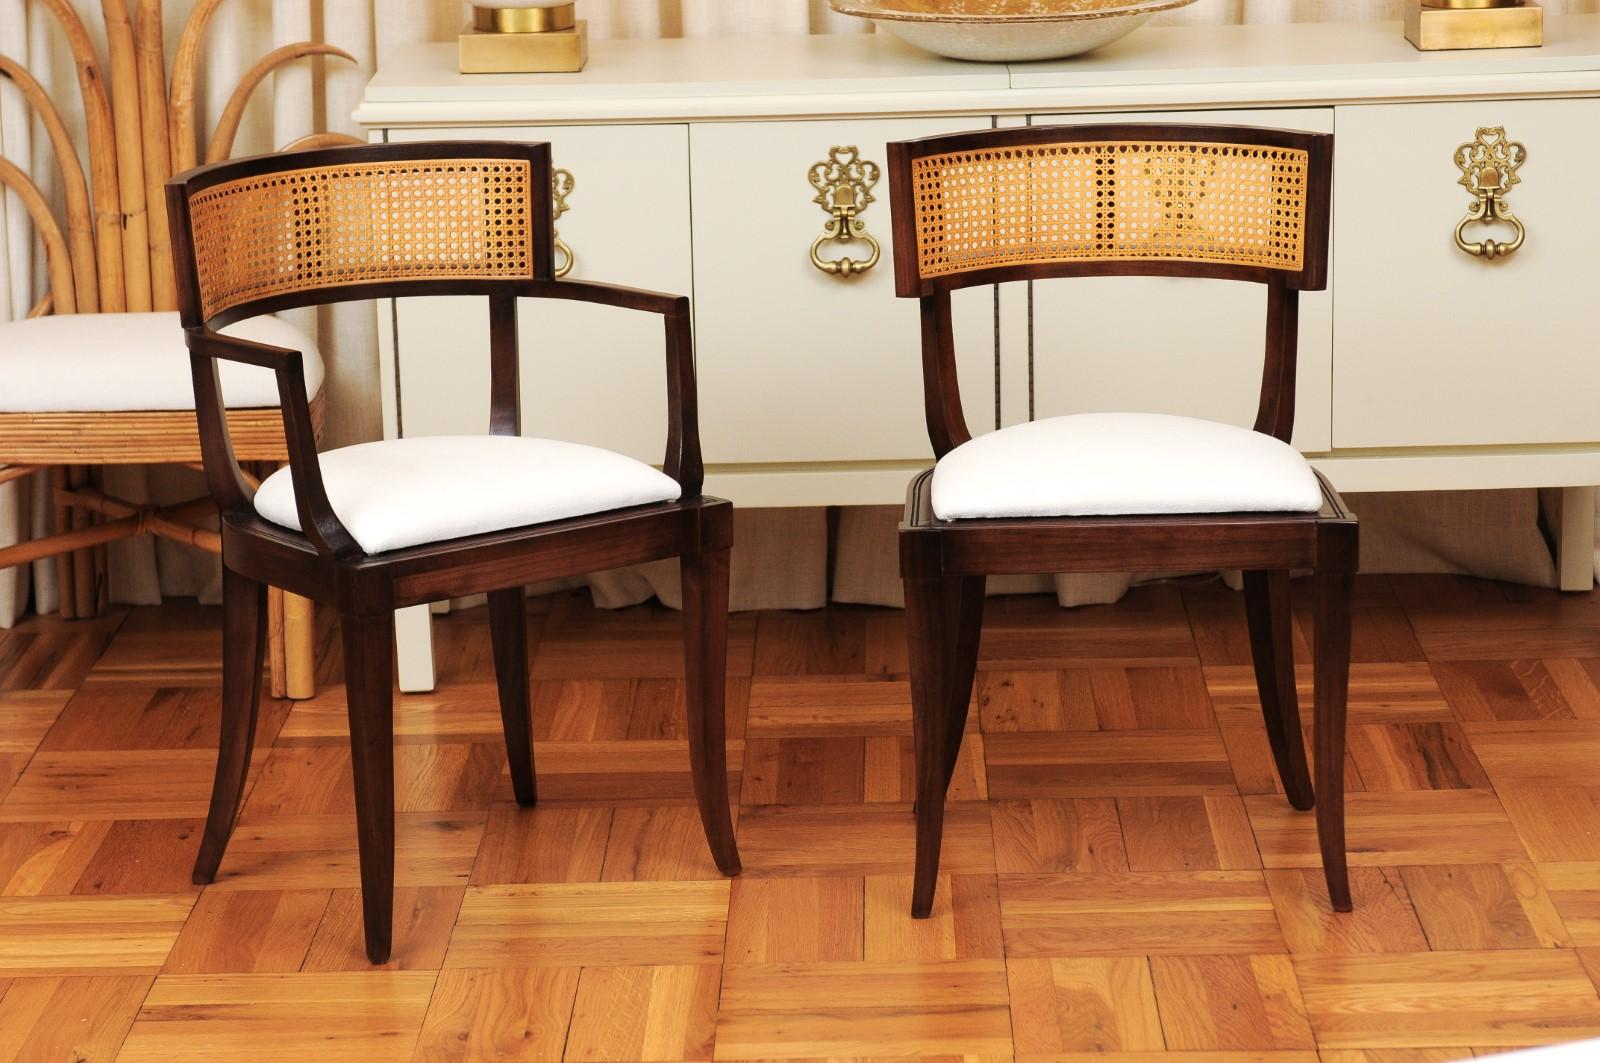 This magnificent set of dining chairs is shipped as professionally photographed and described in the listing narrative: Meticulously professionally restored, newly upholstered and completely installation ready. Expert custom upholstery service is